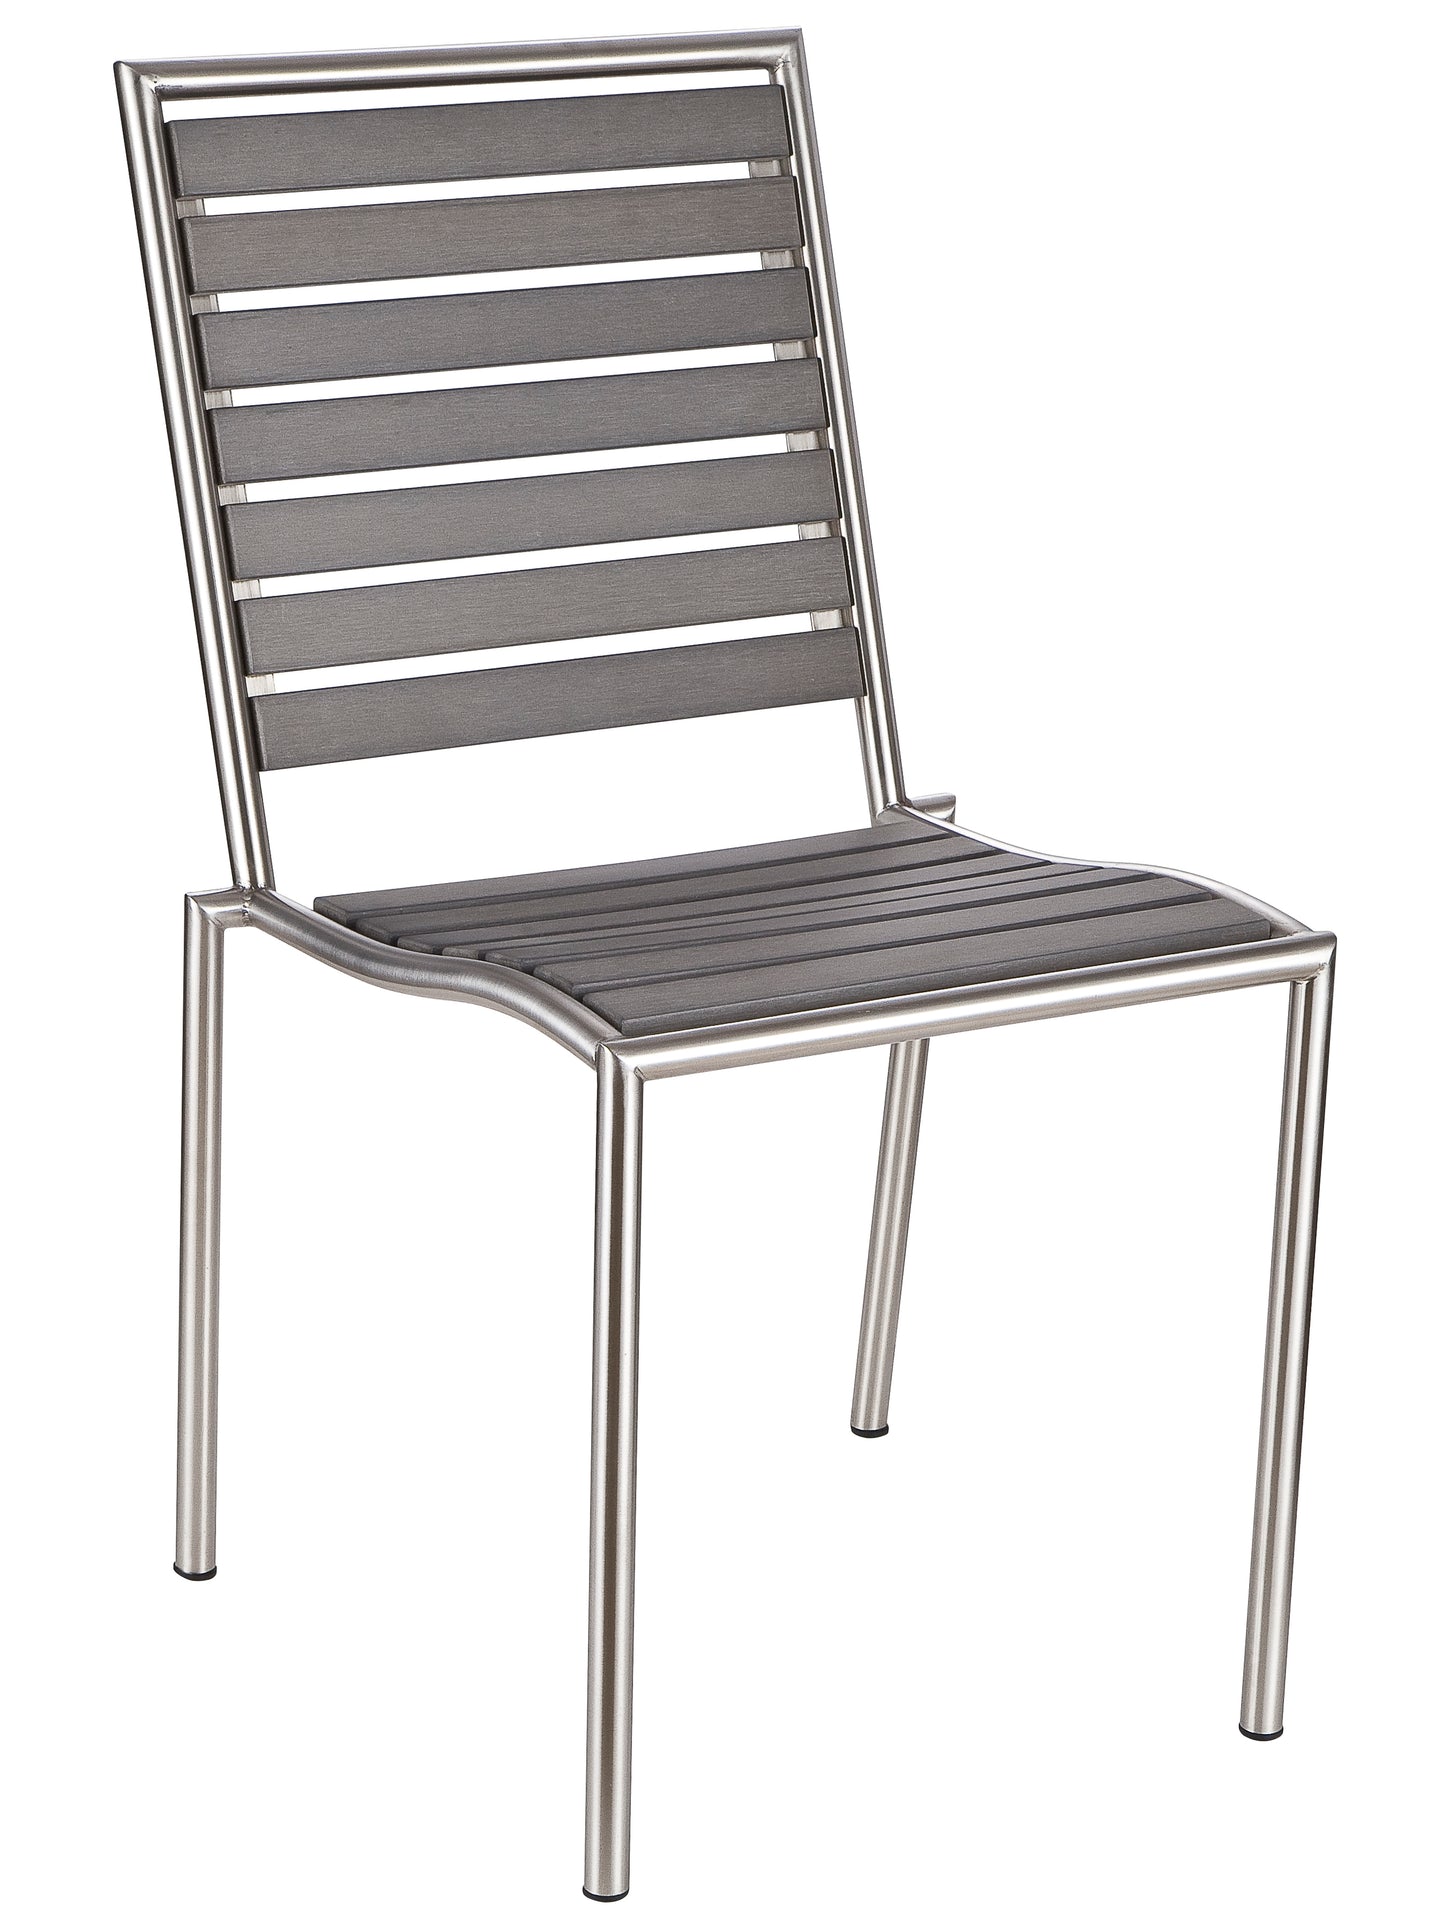 Cortesi Home Tarou Stainless Steel Outdoor Chair in Slate Grey Poly Resin, Brushed Nickel Finish (Set of 2)